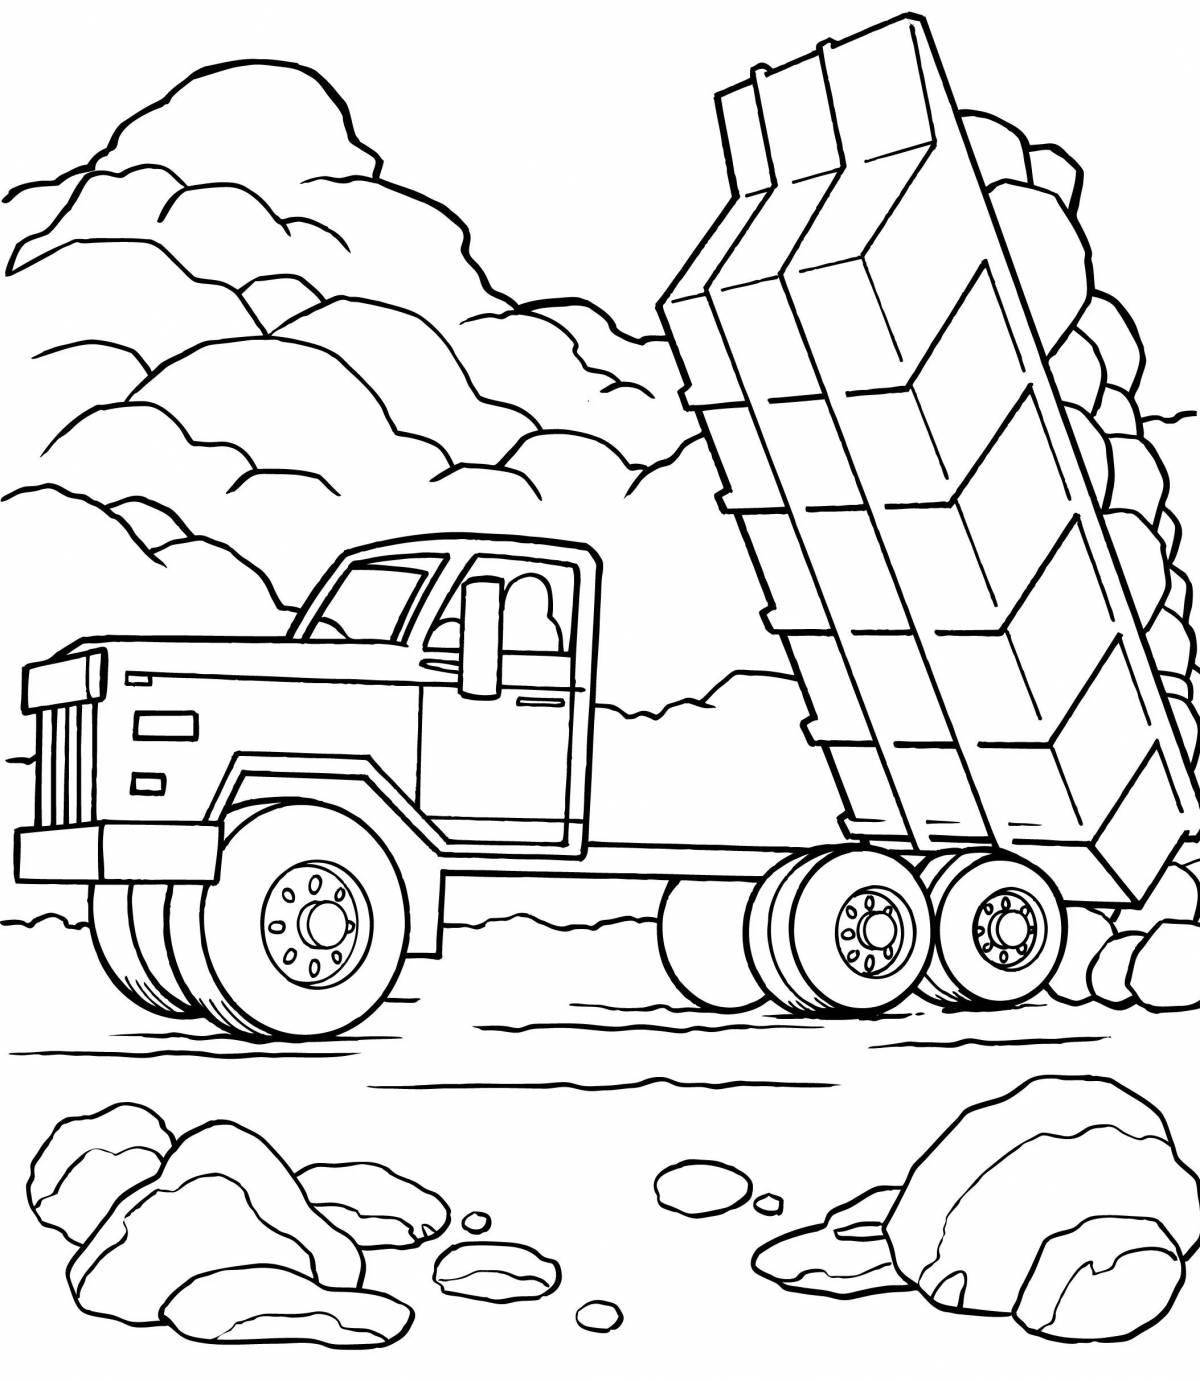 Attractive truck coloring book